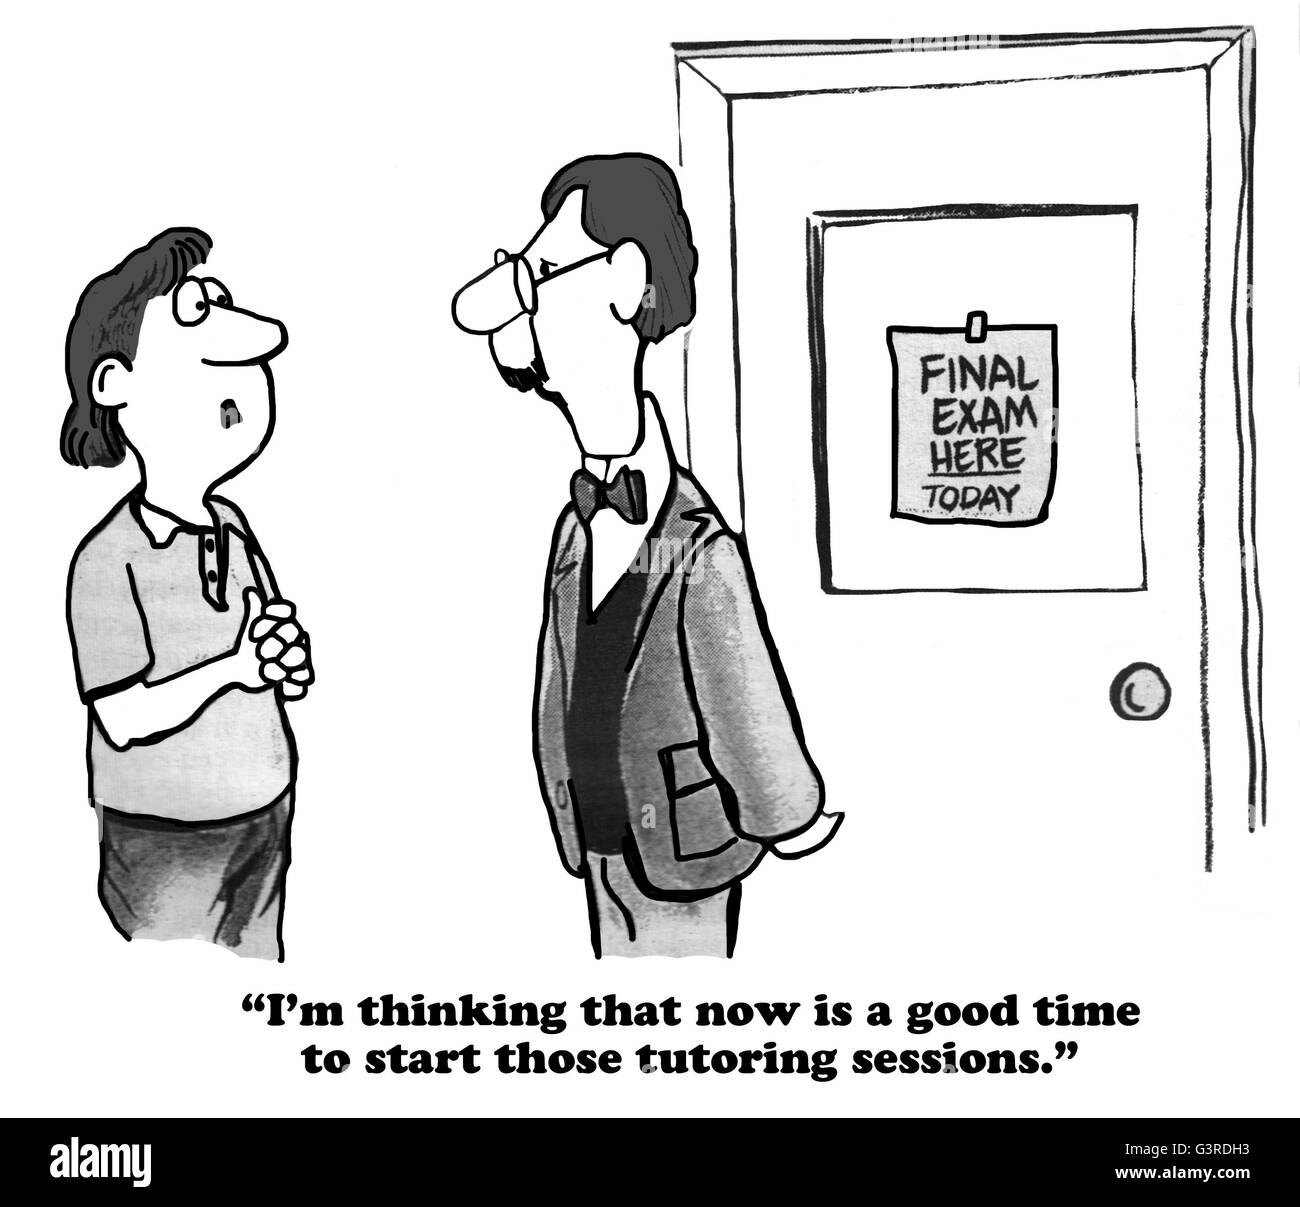 Education cartoon about a student wanting tutoring on the day of the final exam. Stock Photo